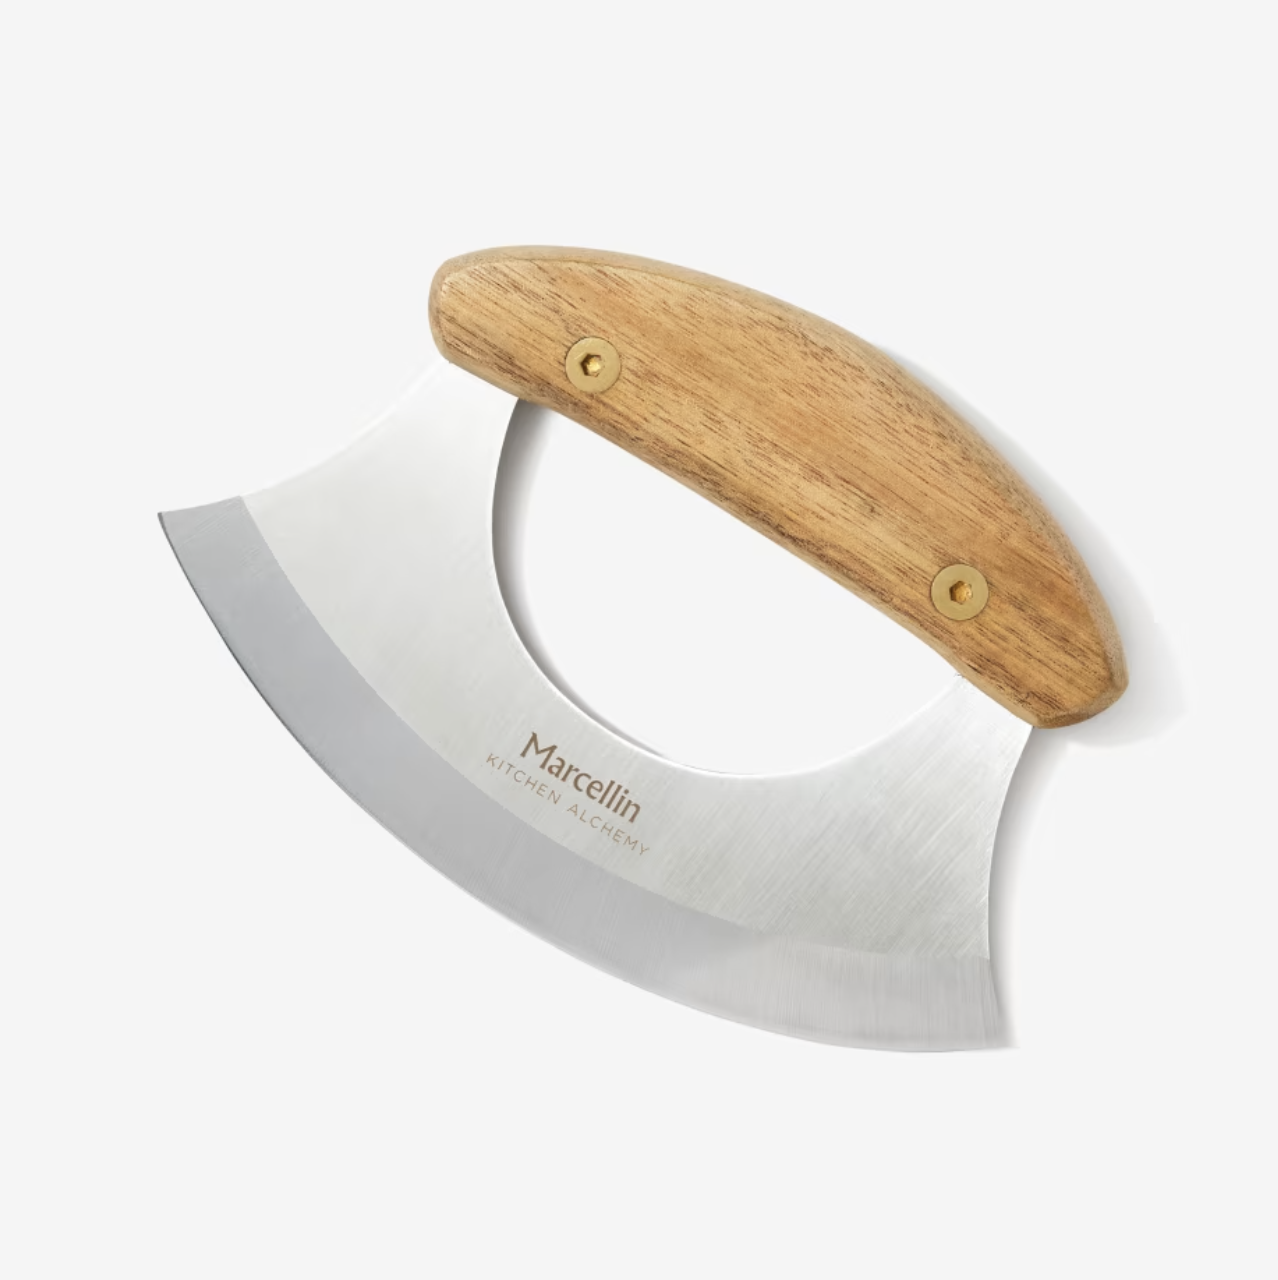 Knife with wood handle